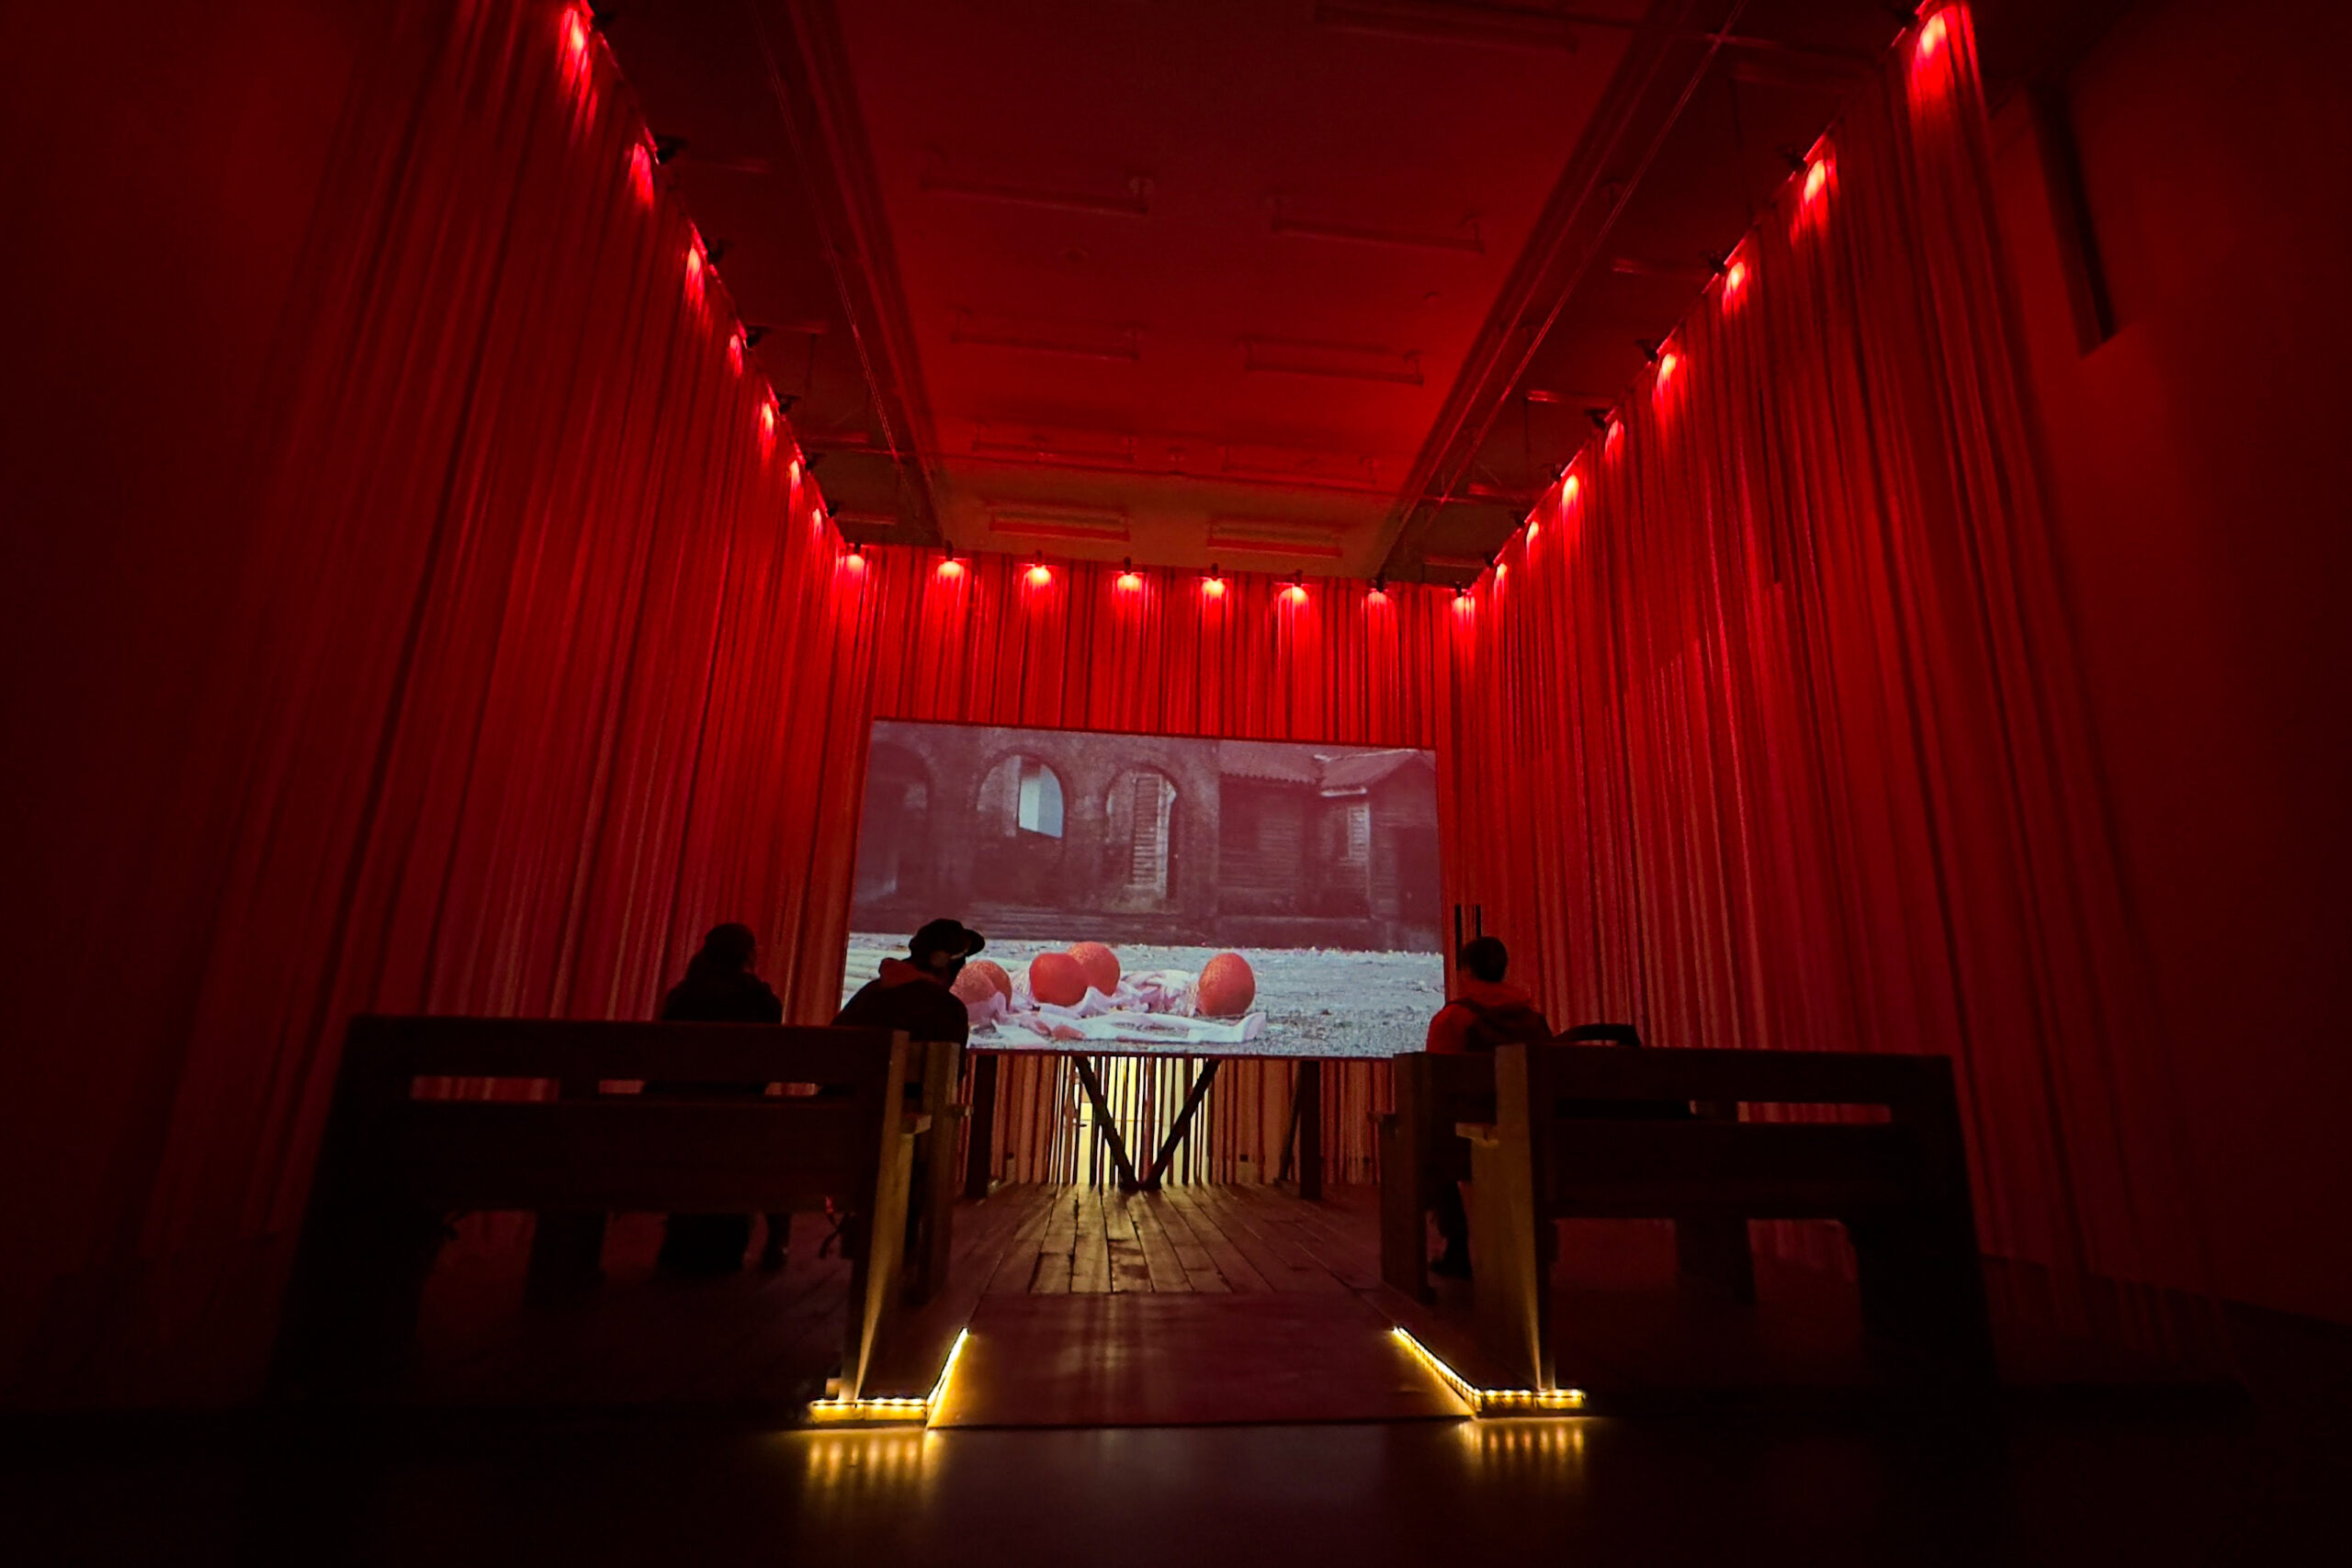 A small room surrounded by red theatre-like curtains and 3 people sitting on benches looking toward a film projected on a screen.